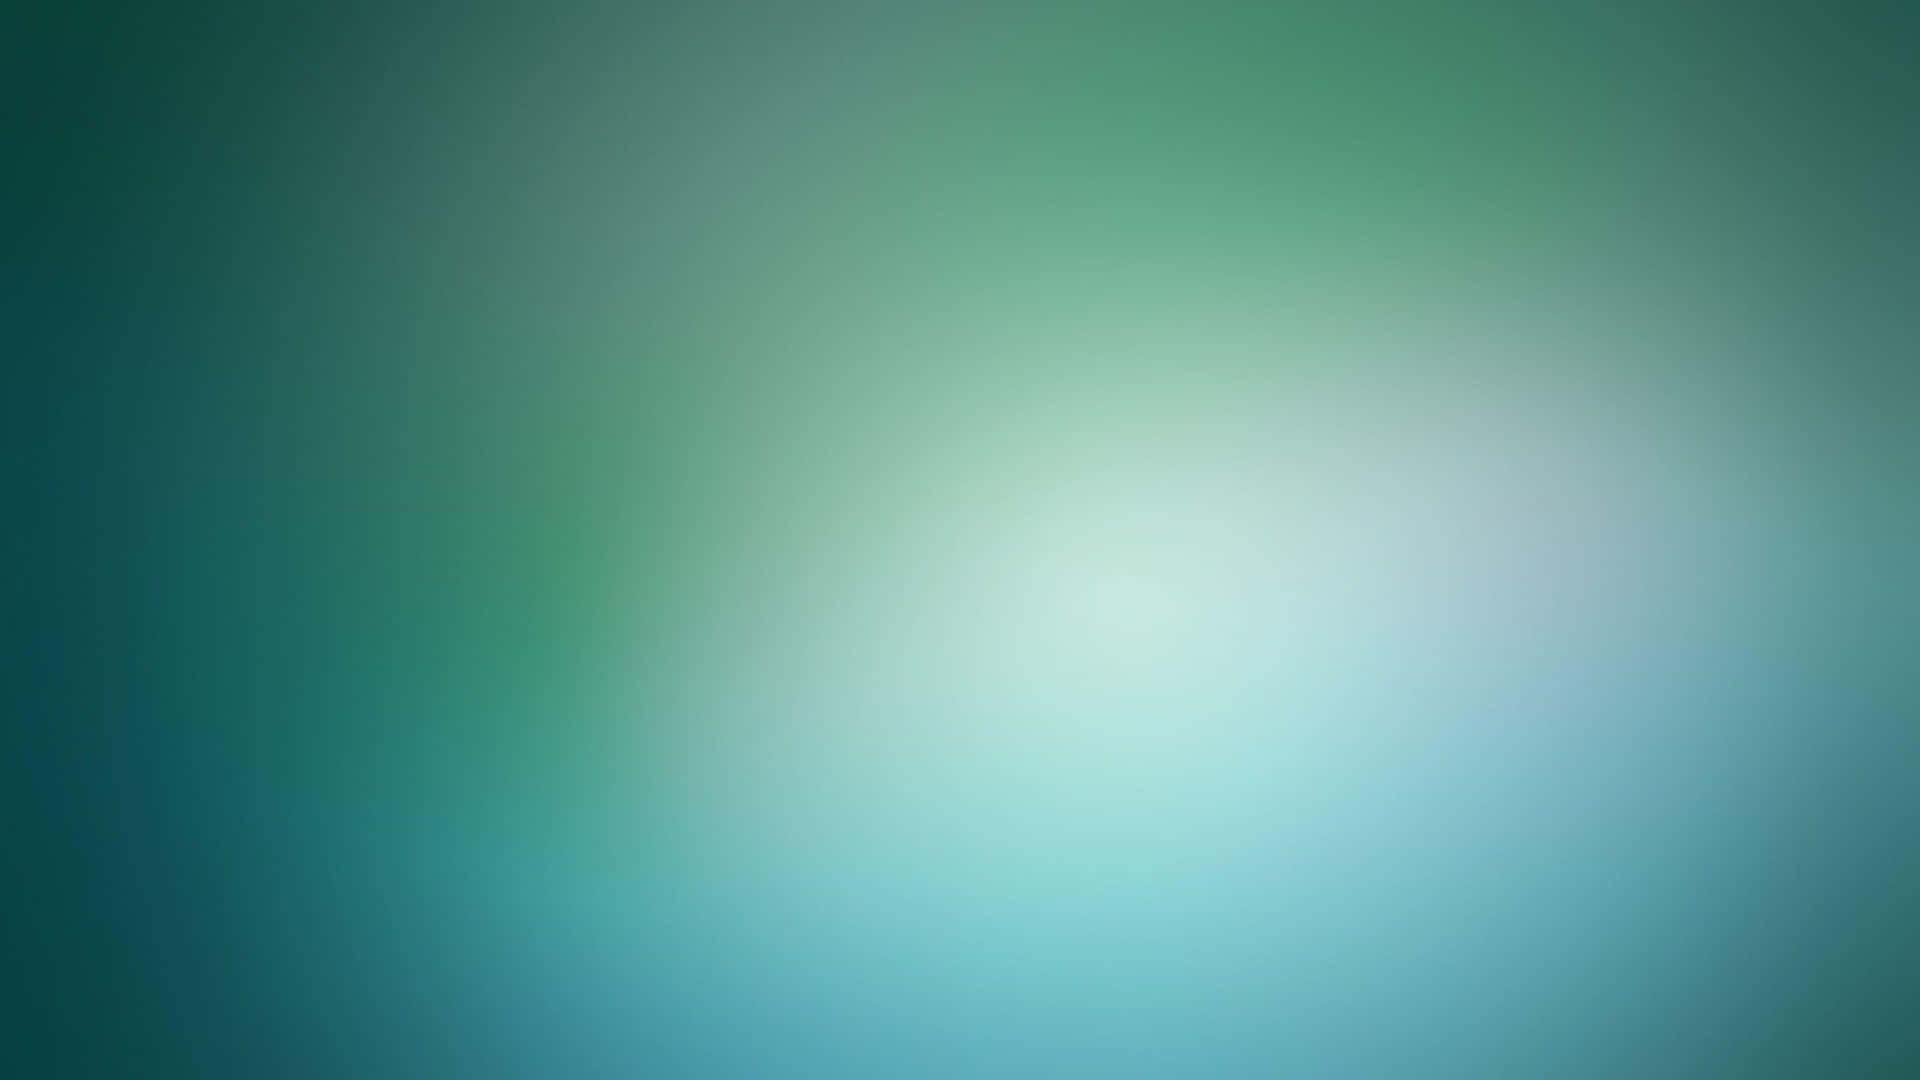 Solid Background Turquoise Gradient Wallpaper